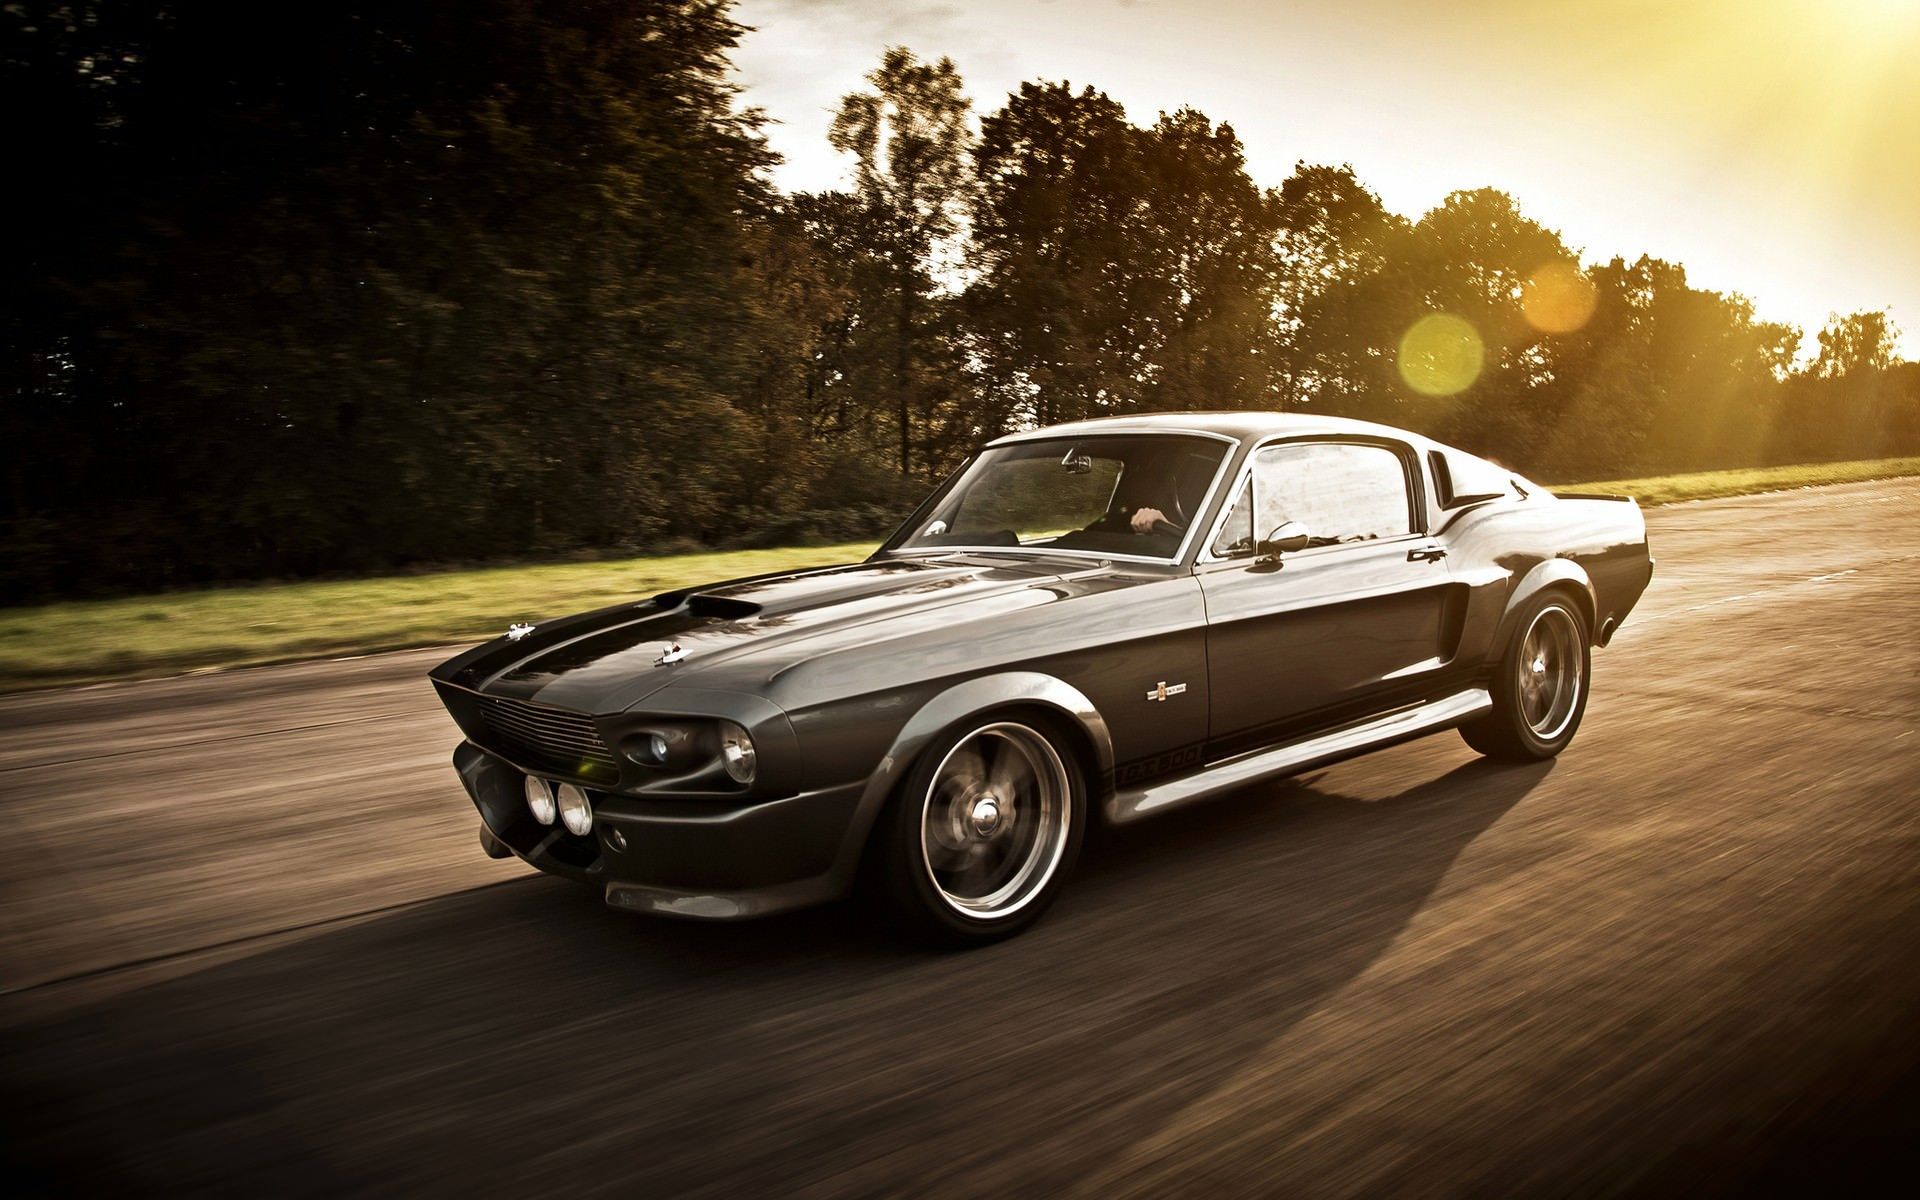 high definition mobile phone and desktop wallpaper. Ford mustang